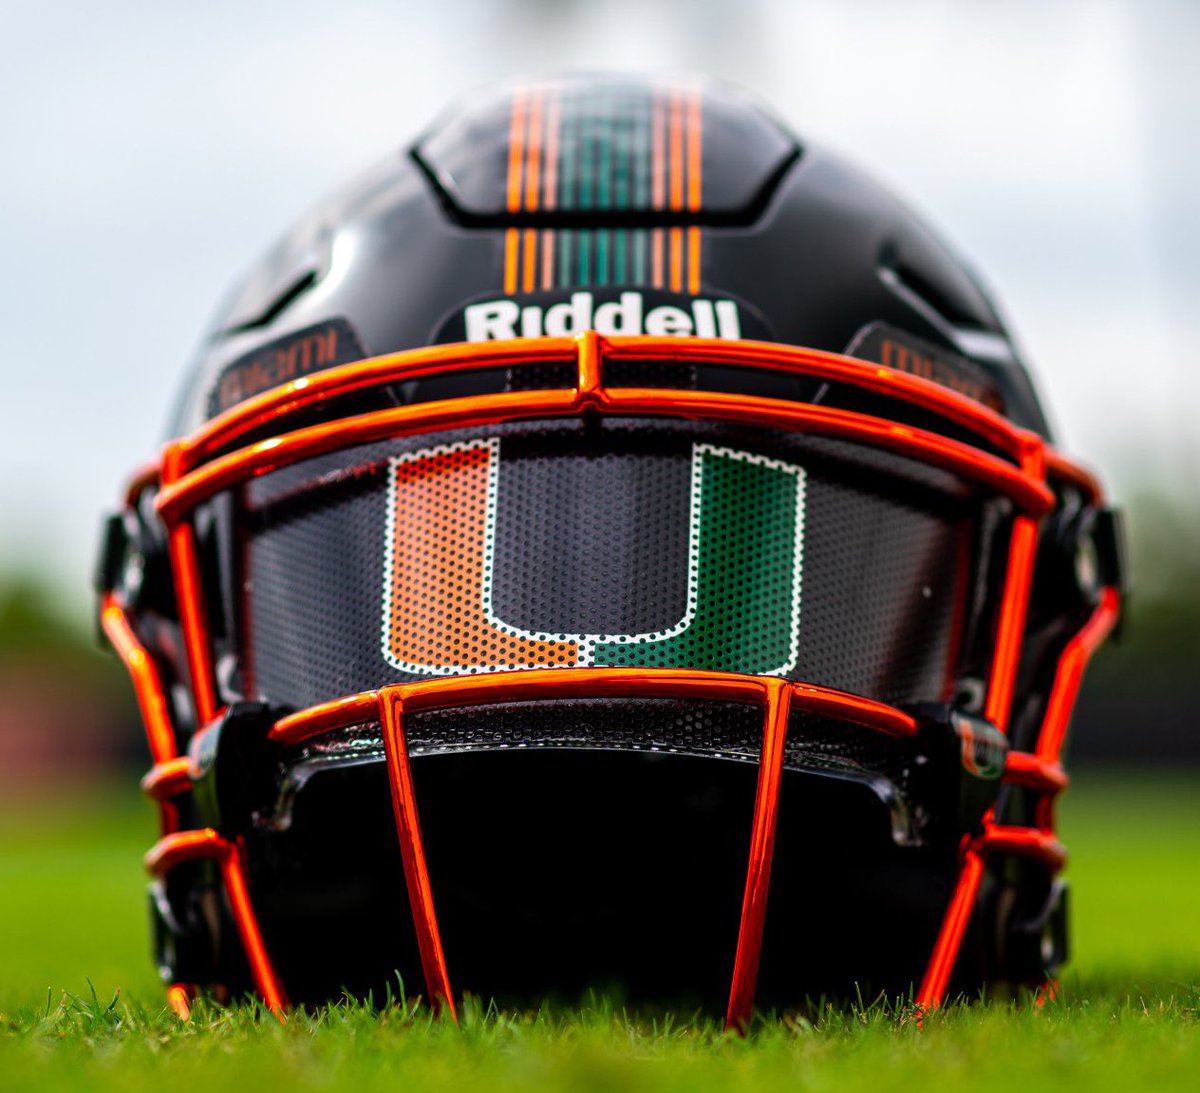 #AGTG After a great conversation w/@coach_cristobal, I am extremely blessed and grateful to receive my first P5 offer from @canesfootball @CoachDawson_UM @CoachLGuidry @Kevin_Beard9